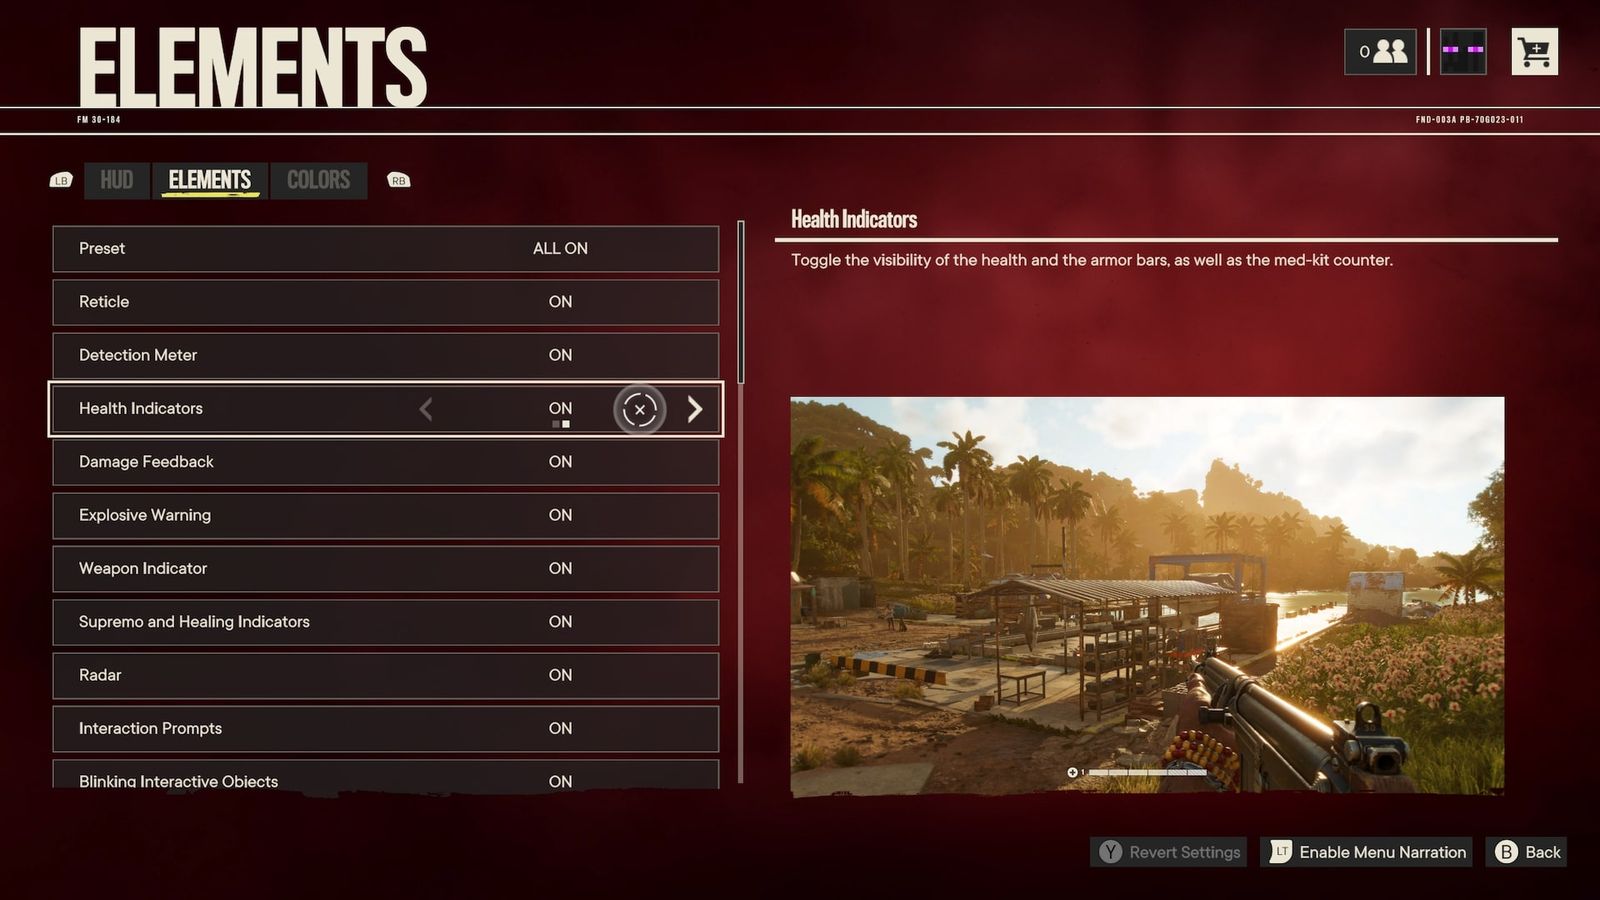 Far Cry 6 Elements under HUD in-game settings, turning health indicators off is the fourth option available.